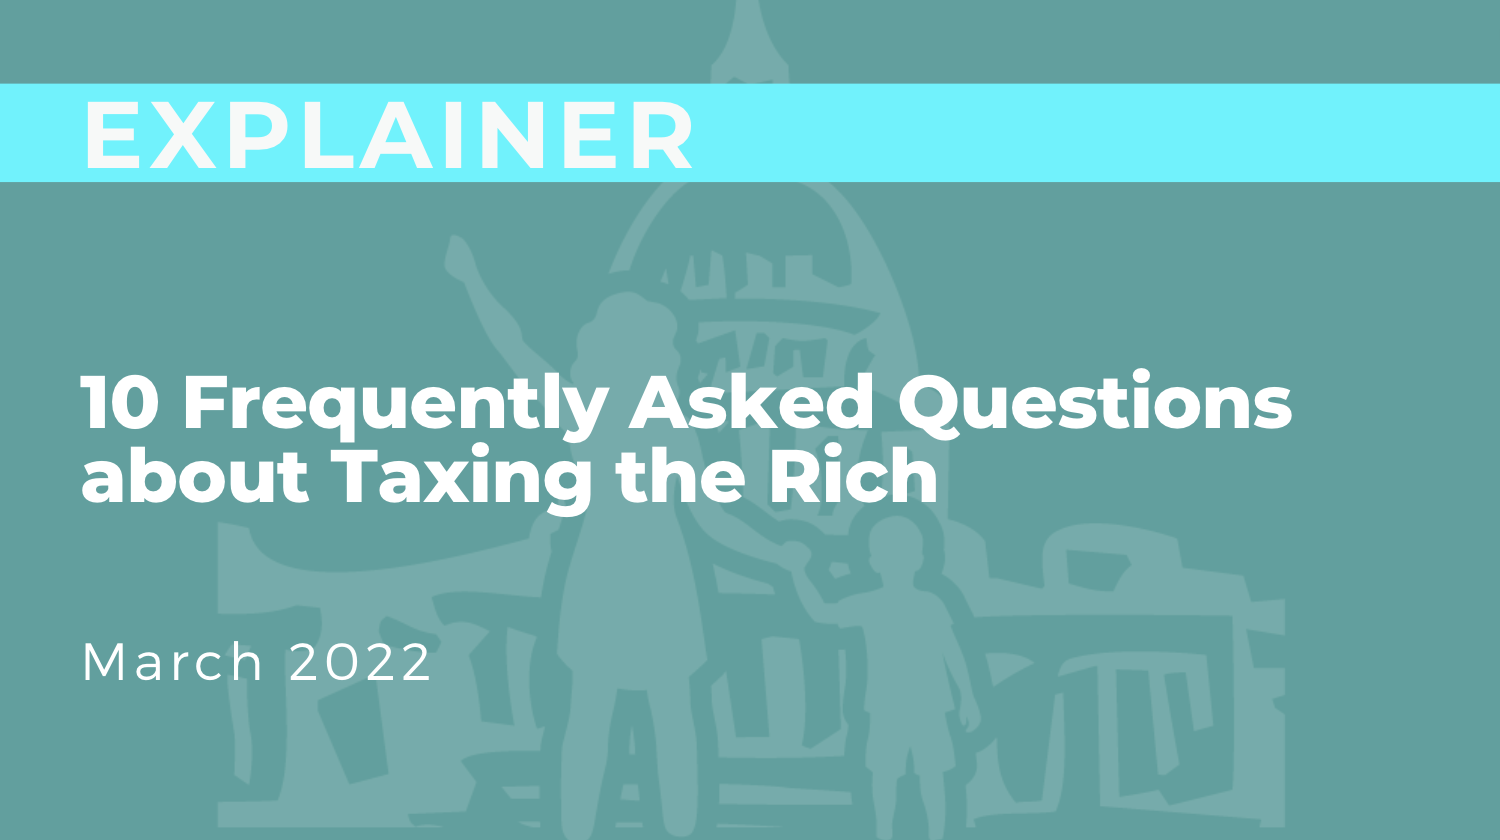 10 FAQs about Taxing the Rich